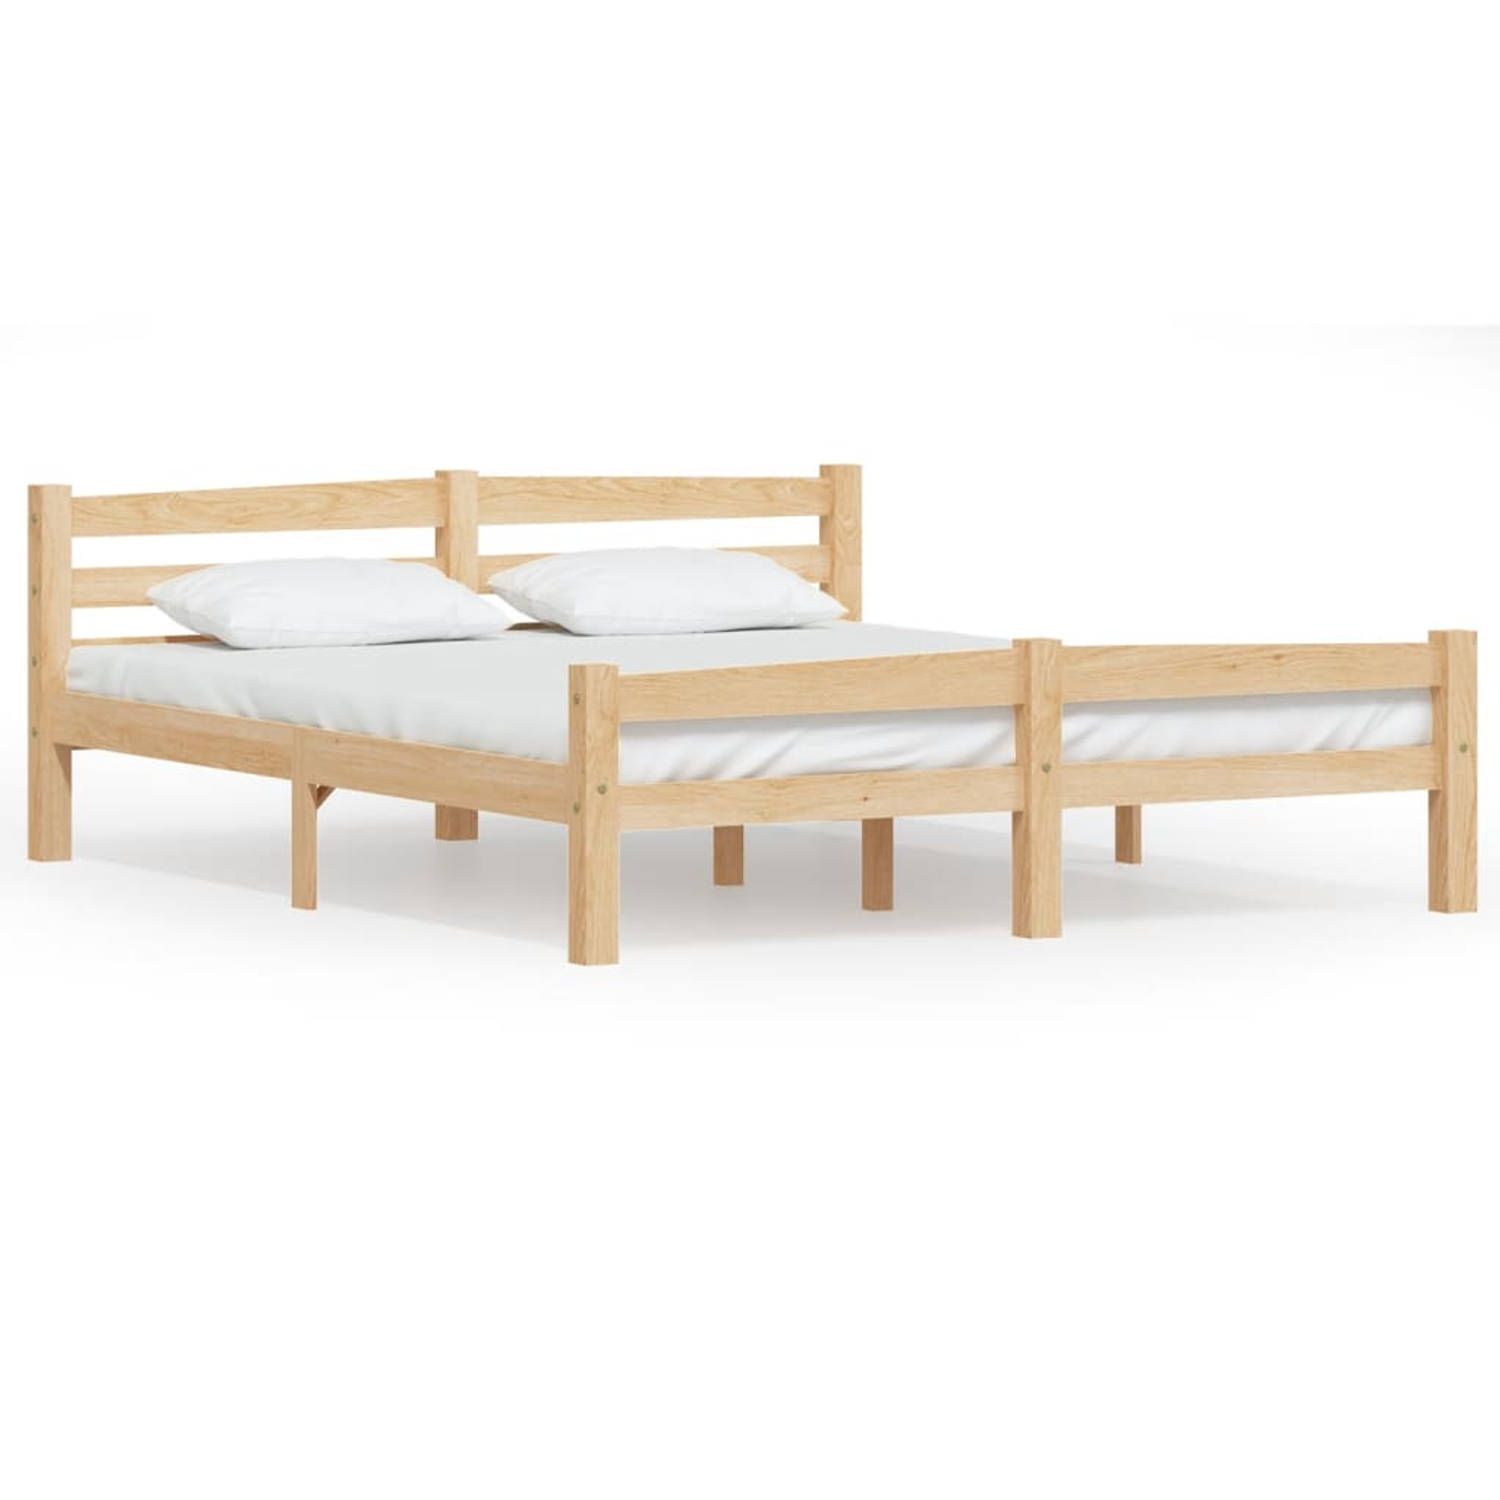 The Living Store Bedframe massief grenenhout 160x200 cm - Bedframe - Bedframe - Bed Frame - Bed Frames - Bed - Bedden - 2-persoonsbed - 2-persoonsbedden - Tweepersoons Bed